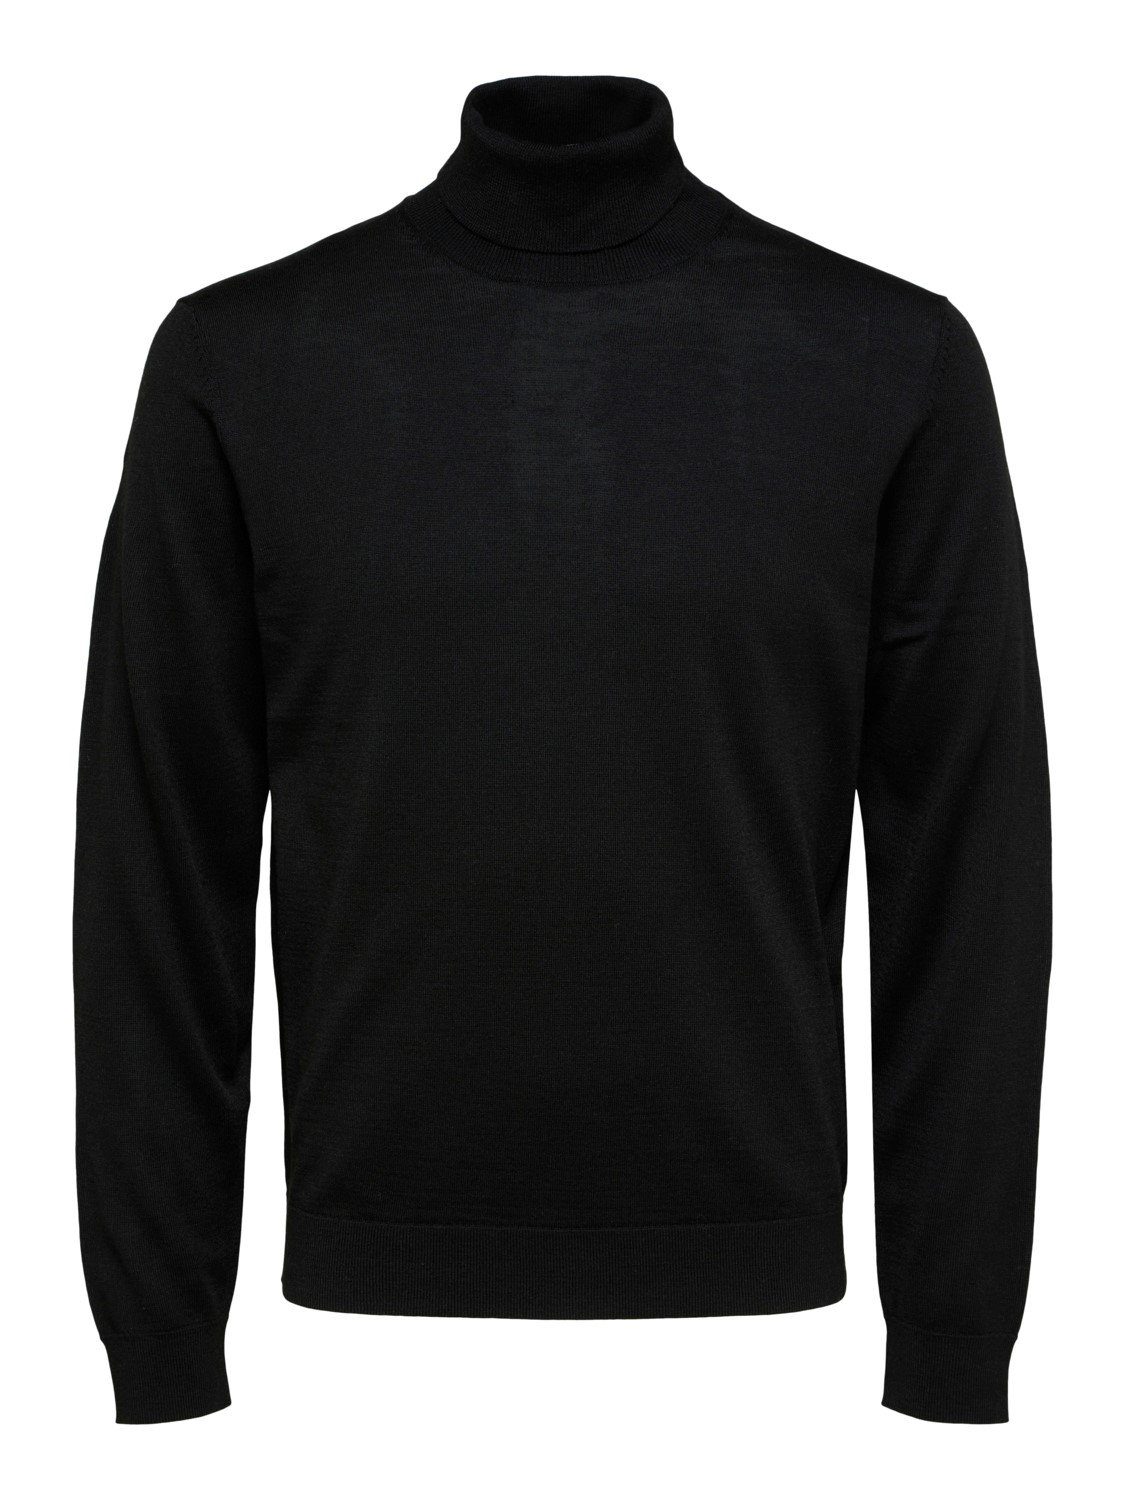 SELECTED HOMME Strickpullover SLHTOWN MERINO Wollmix COOLMAX Black 16084840 aus